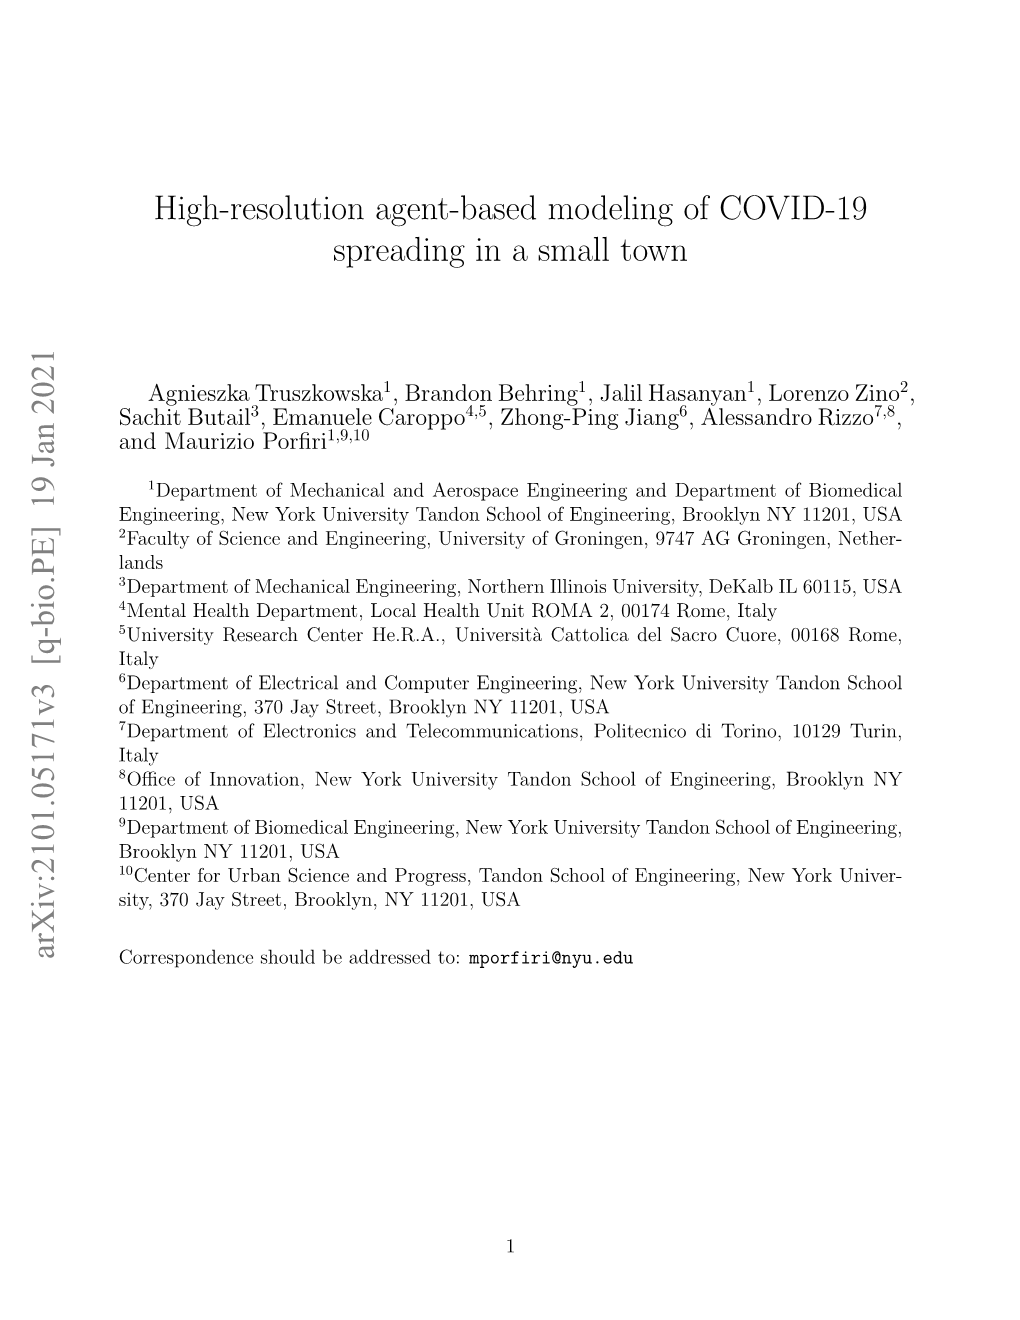 High-Resolution Agent-Based Modeling of COVID-19 Spreading in a Small Town